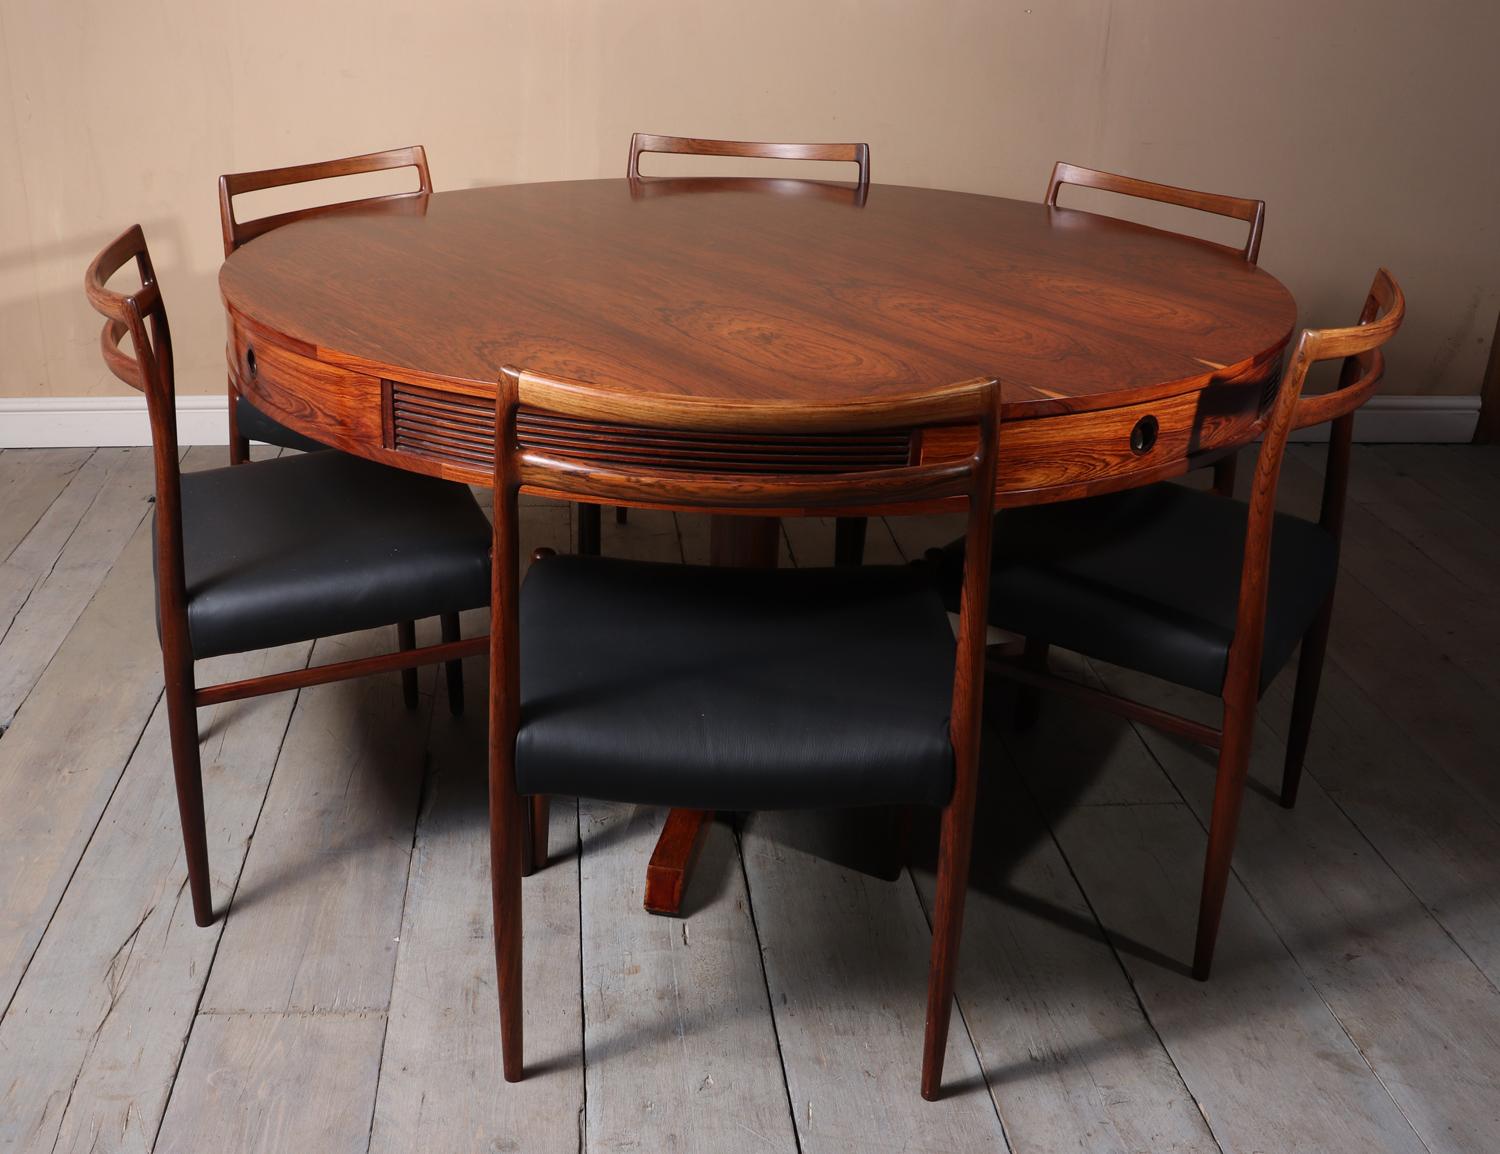 Wood Rosewood Drum Table by Robert Heritage for Archie Shine, circa 1957